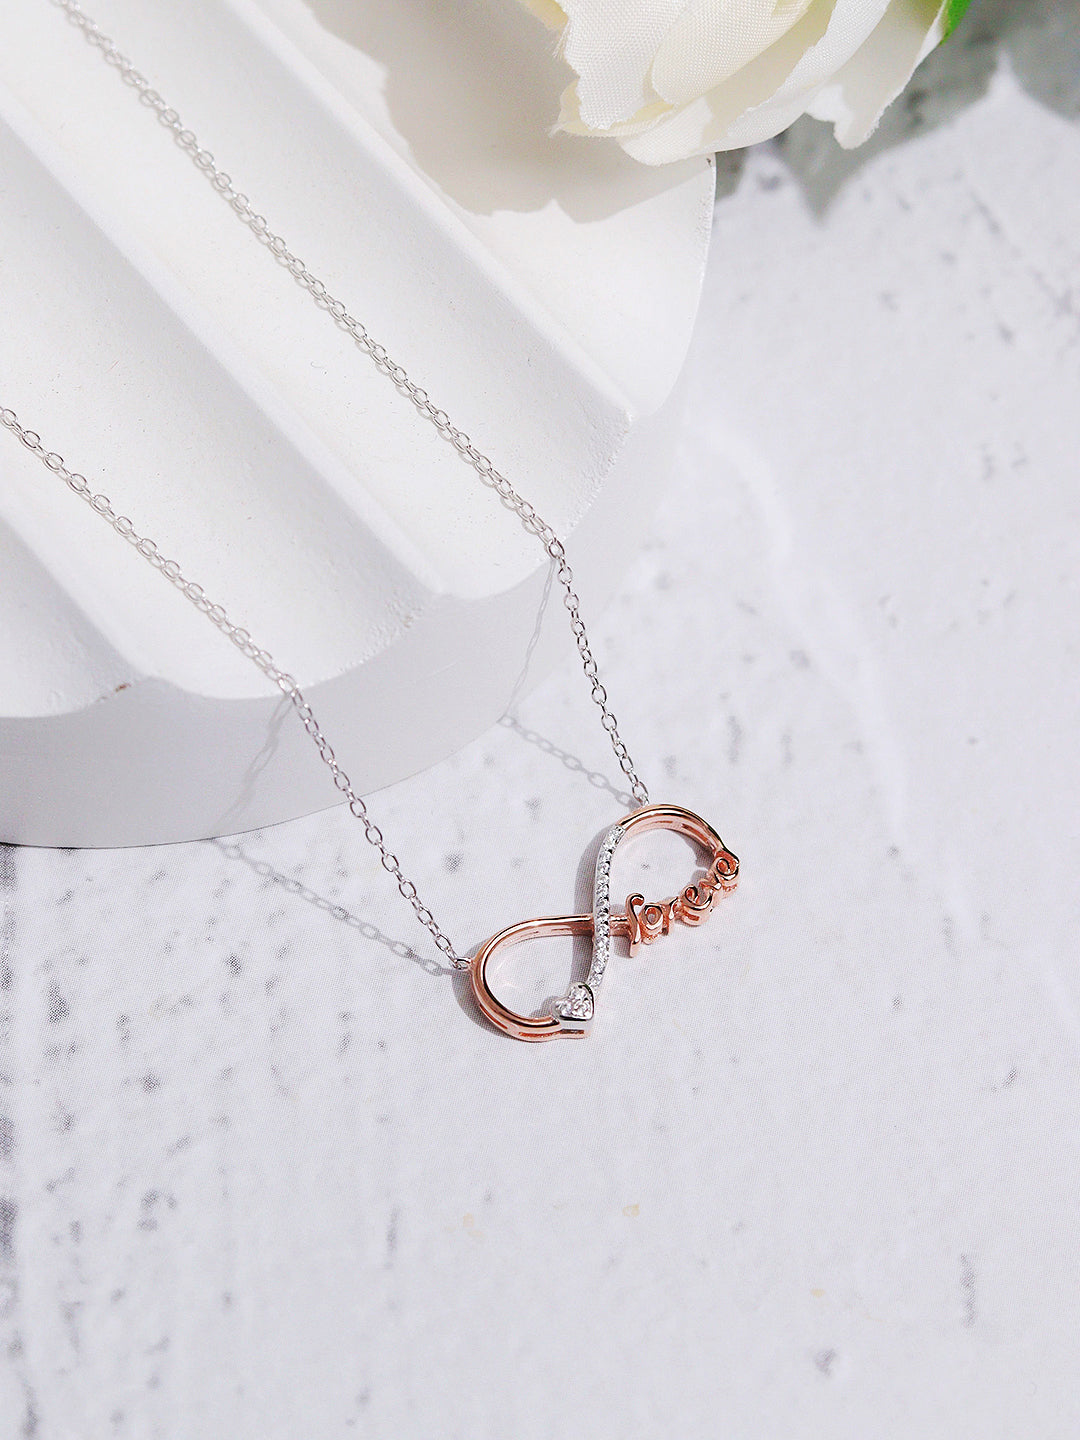 925 Silver Rose Gold Plated Hope Pendant Necklace 